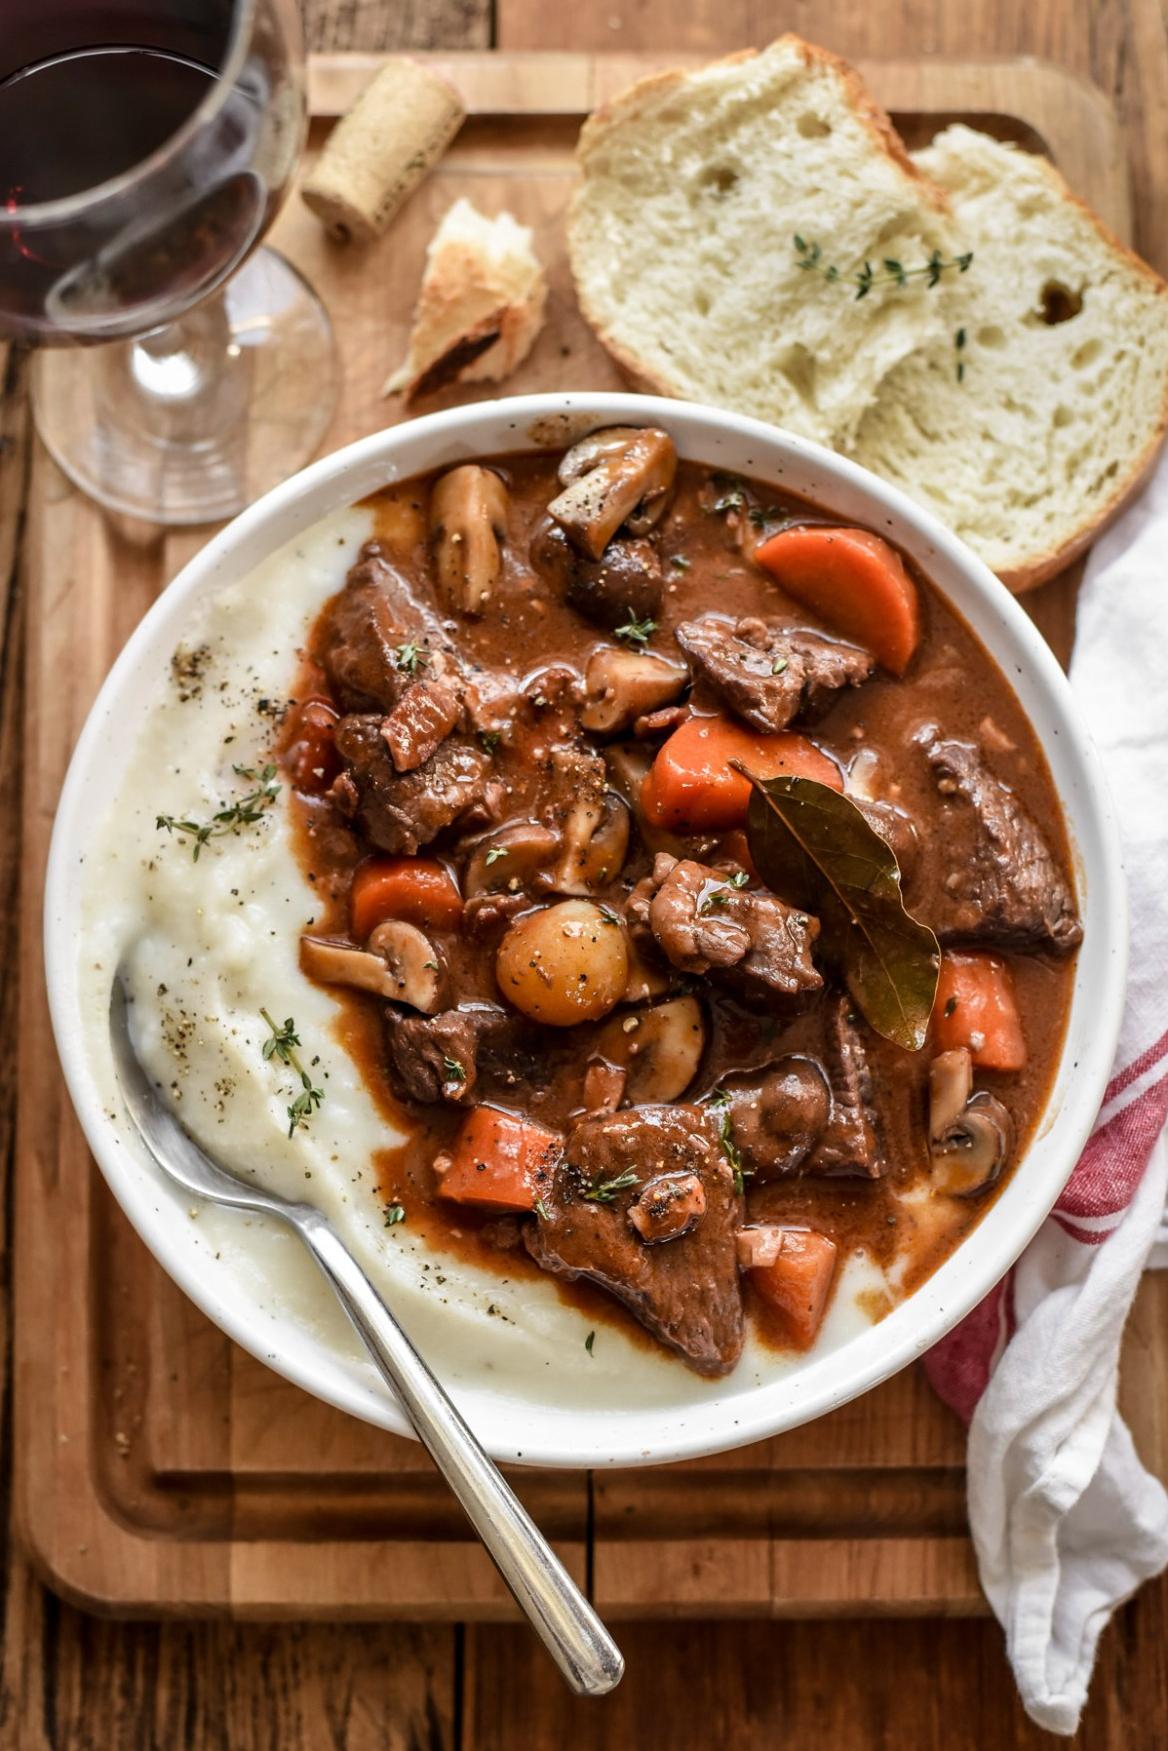  Sizzle up some indulgent beef in red wine and brandy